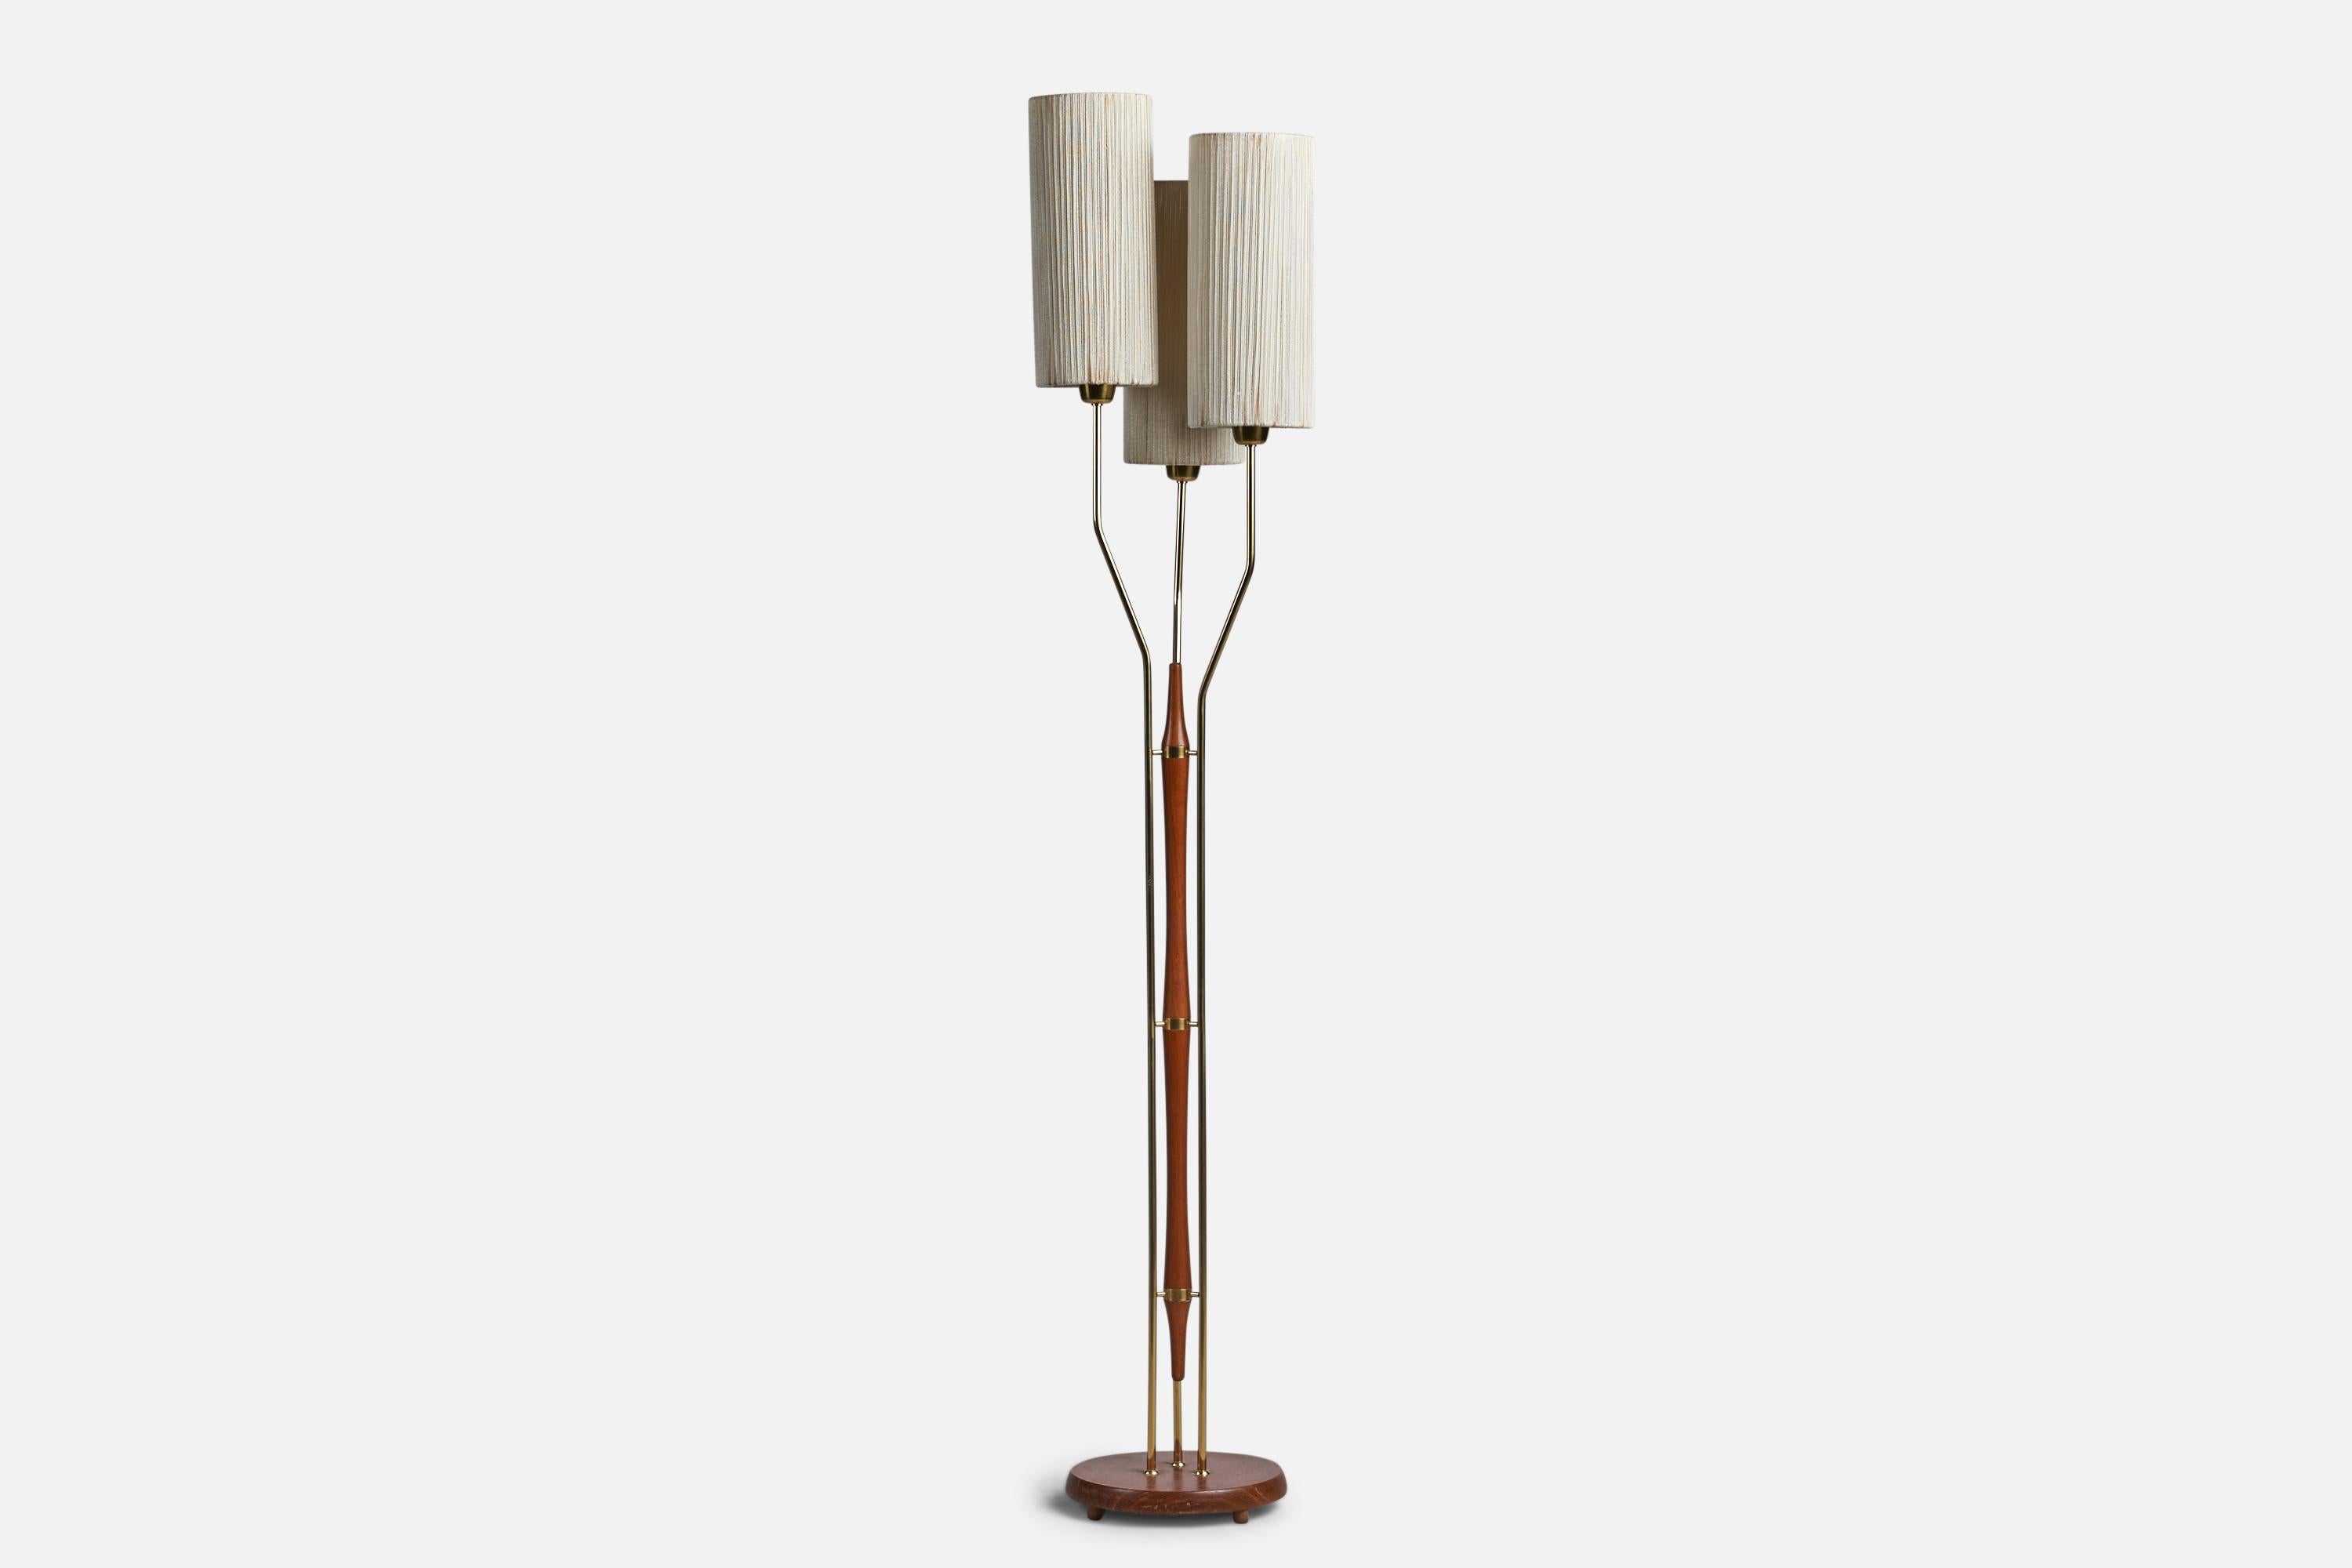 A brass, teak and fabric string floor lamp designed and produced in Sweden, 1950s.

Overall Dimensions (inches): 58.75” H x 11.25” Diameter
Bulb Specifications: E-26 Bulb
Number of Sockets: 1
All lighting will be converted for US usage. We are